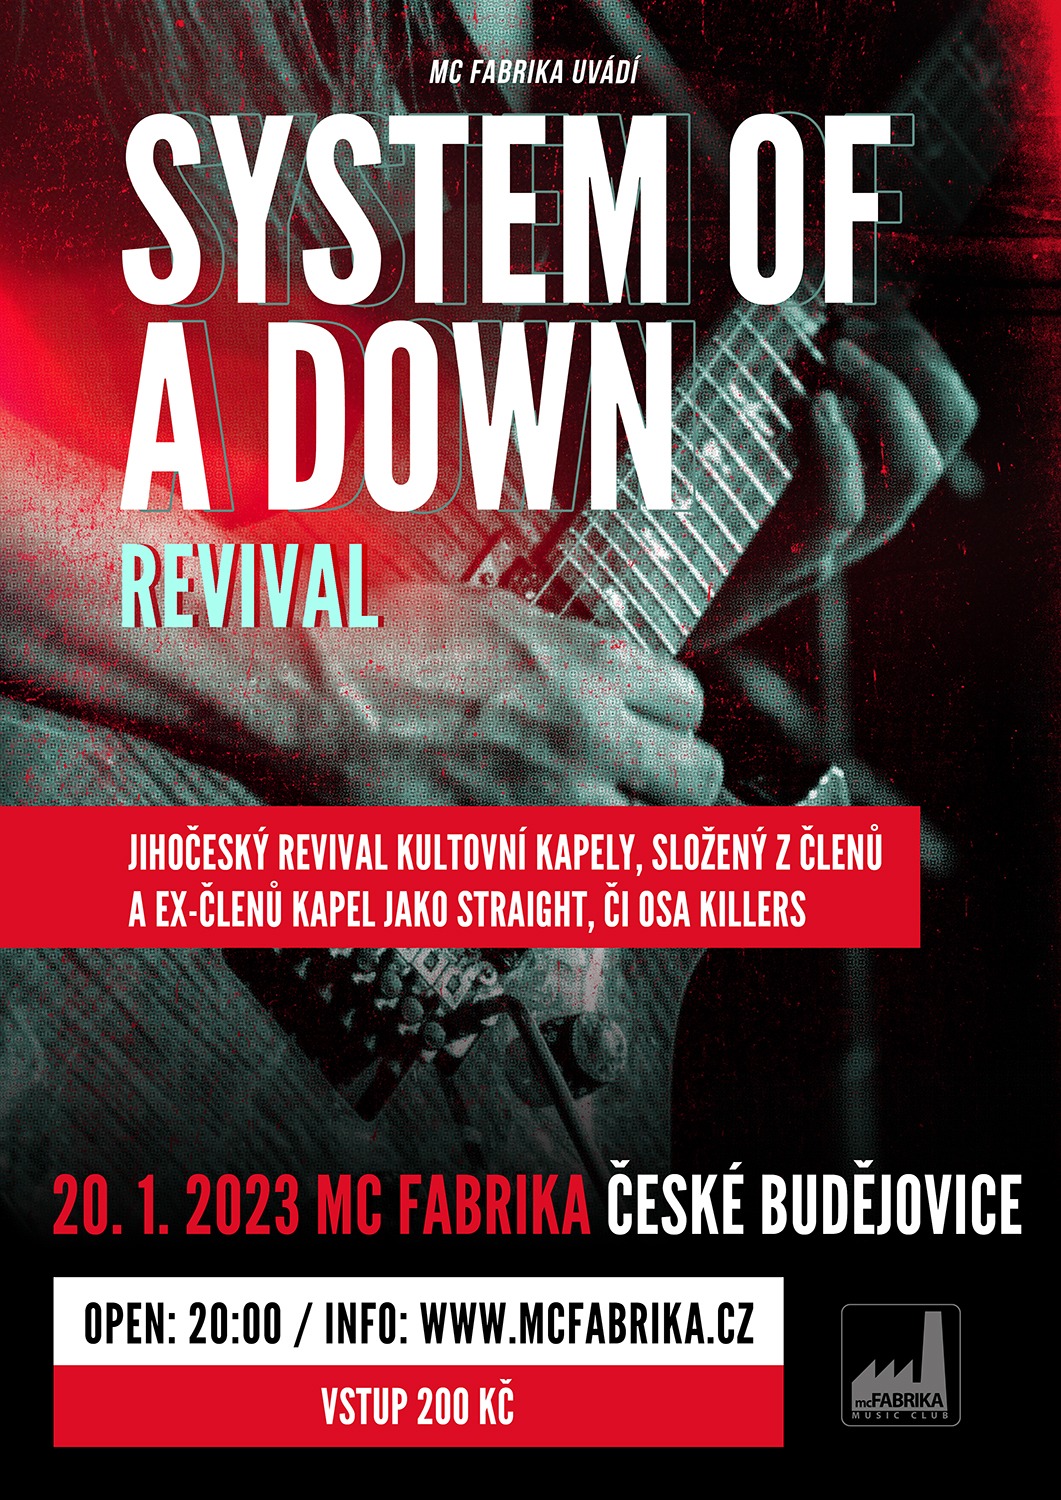 System of a Down revival